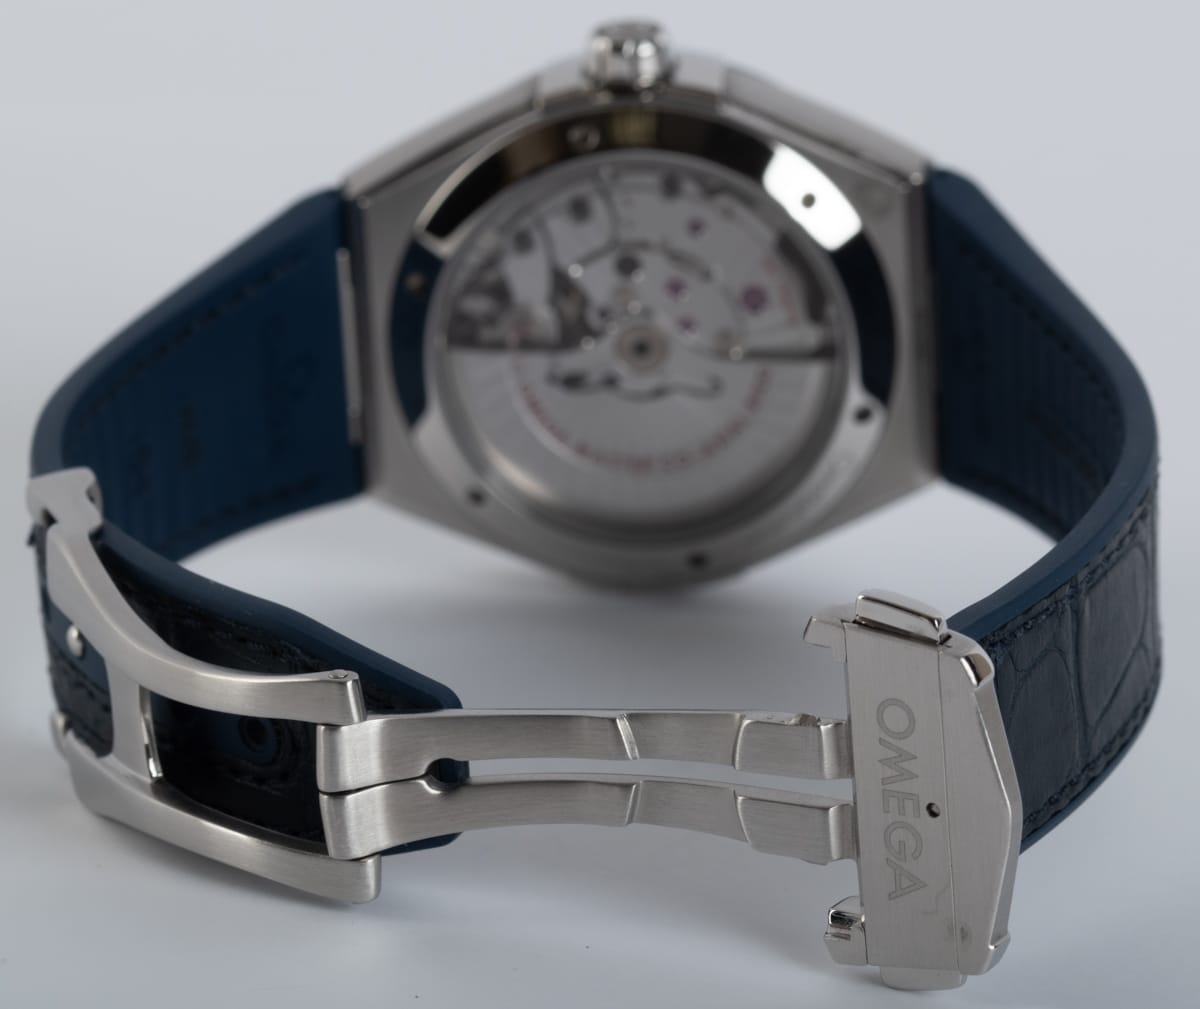 Open Clasp Shot of Constellation Co-Axial Master Chronometer